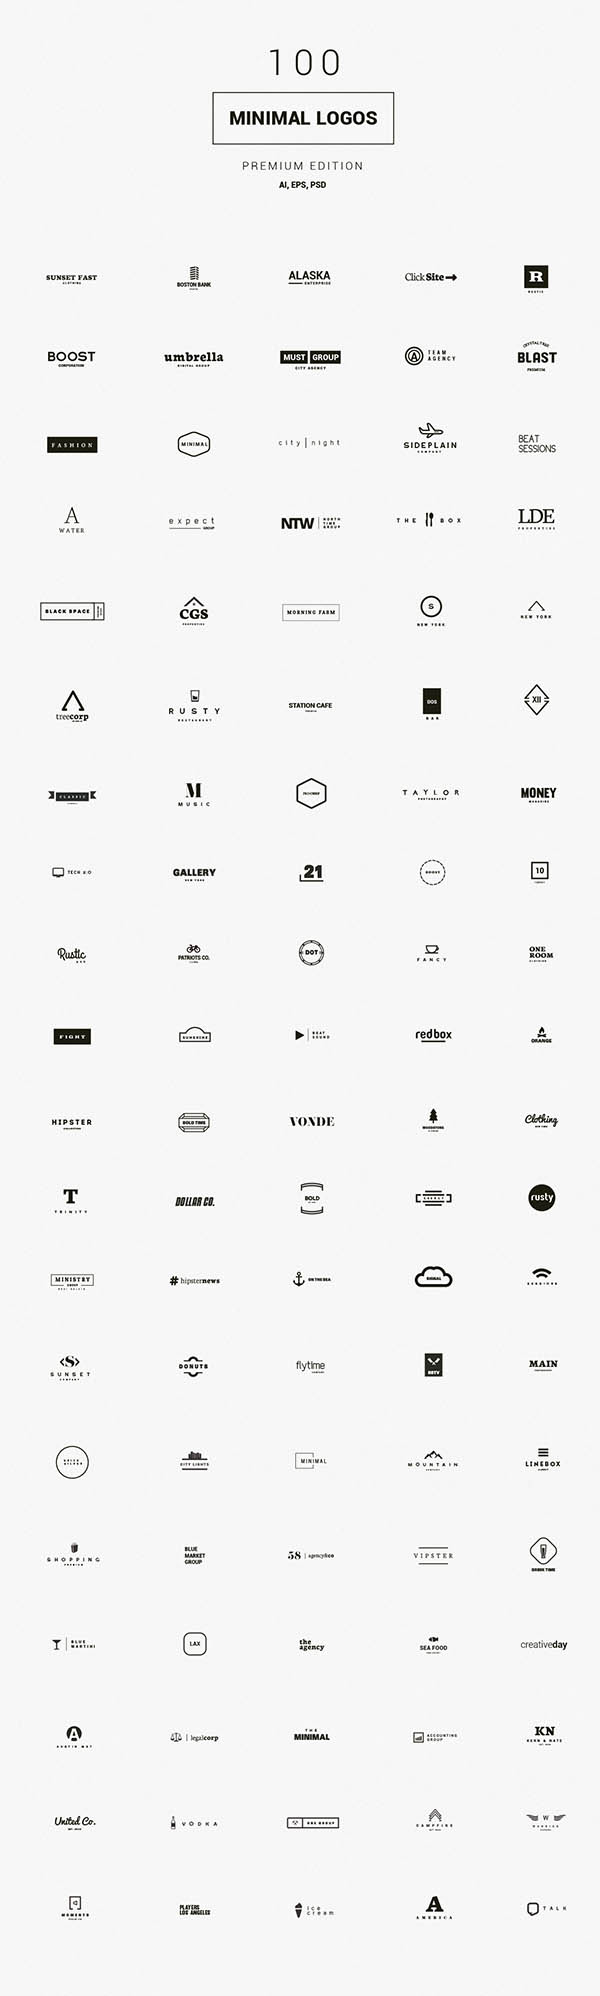 900+ Amazing Logos Bundle Available in .AI & .PSD - 25